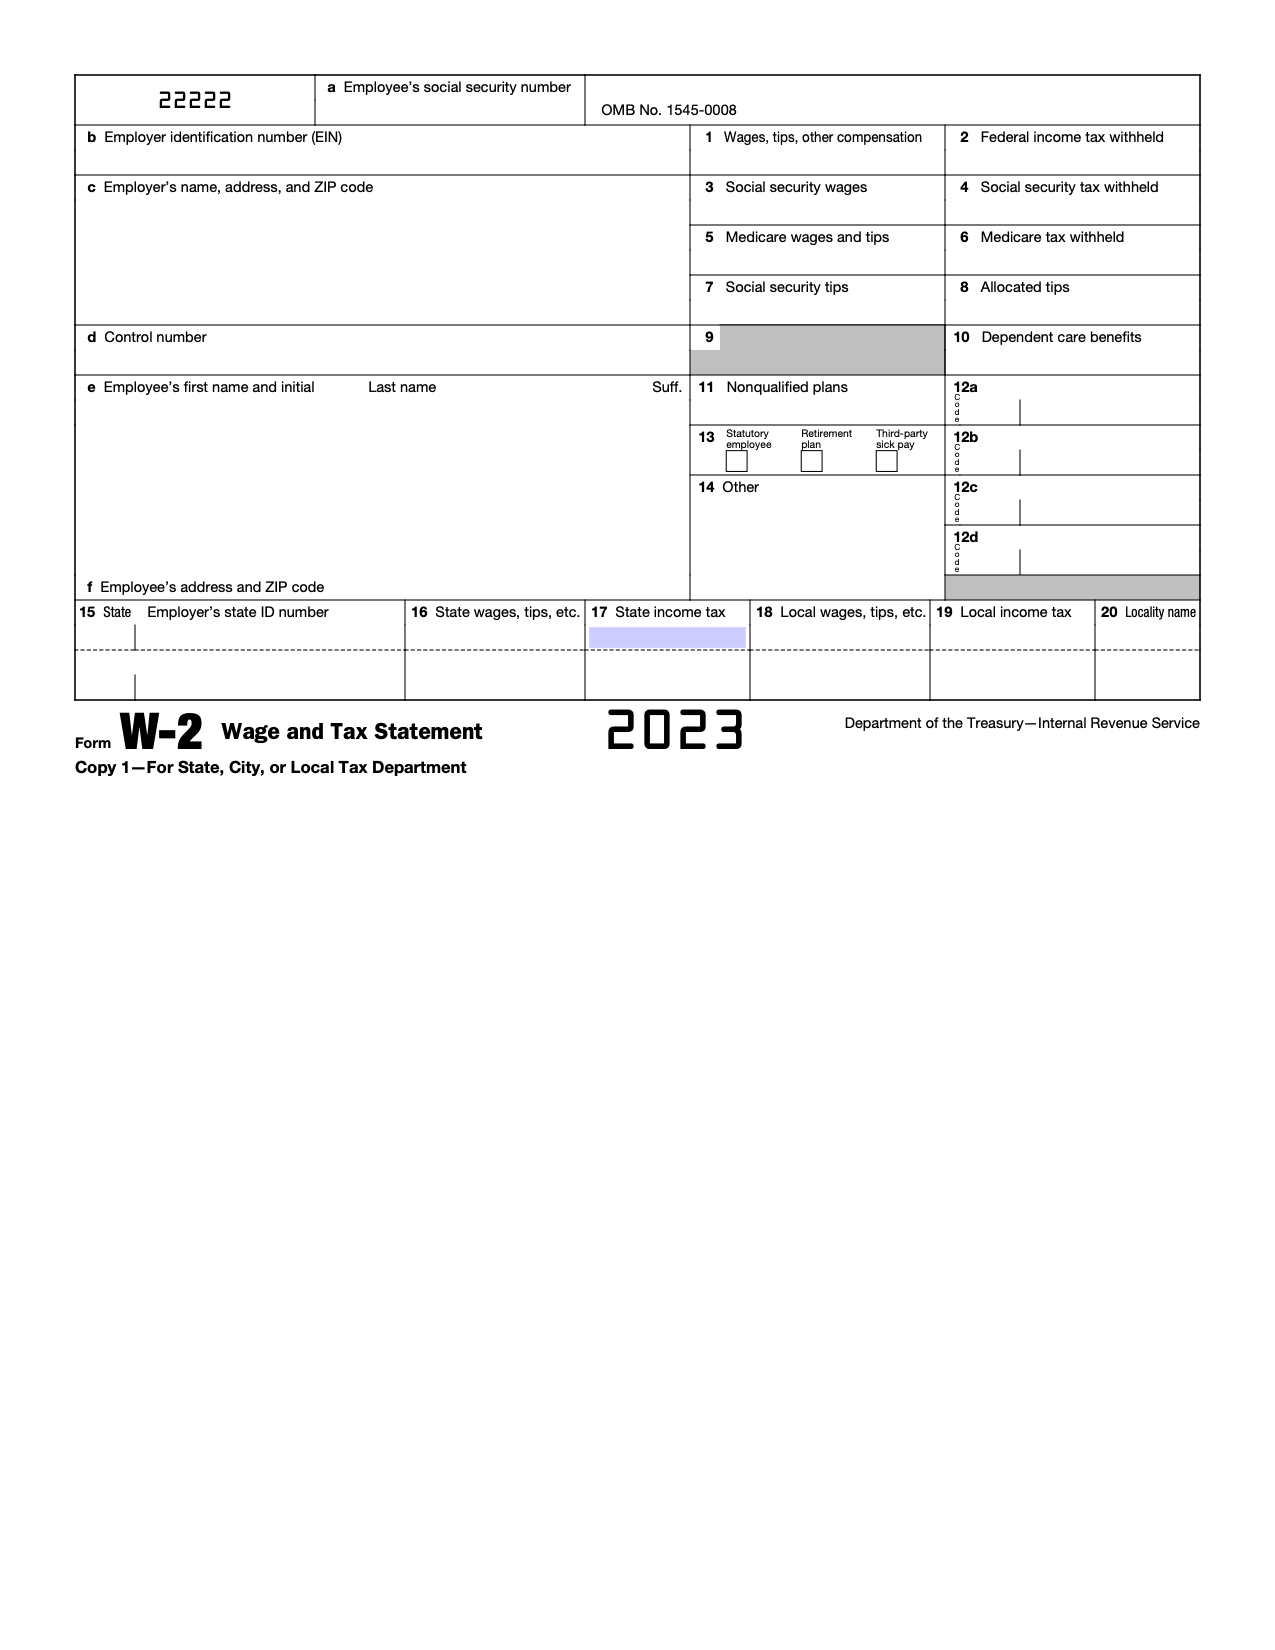 Free Irs Form W-2 | Wage And Tax Statement - Pdf – Eforms intended for Make A W2 Form Online Free